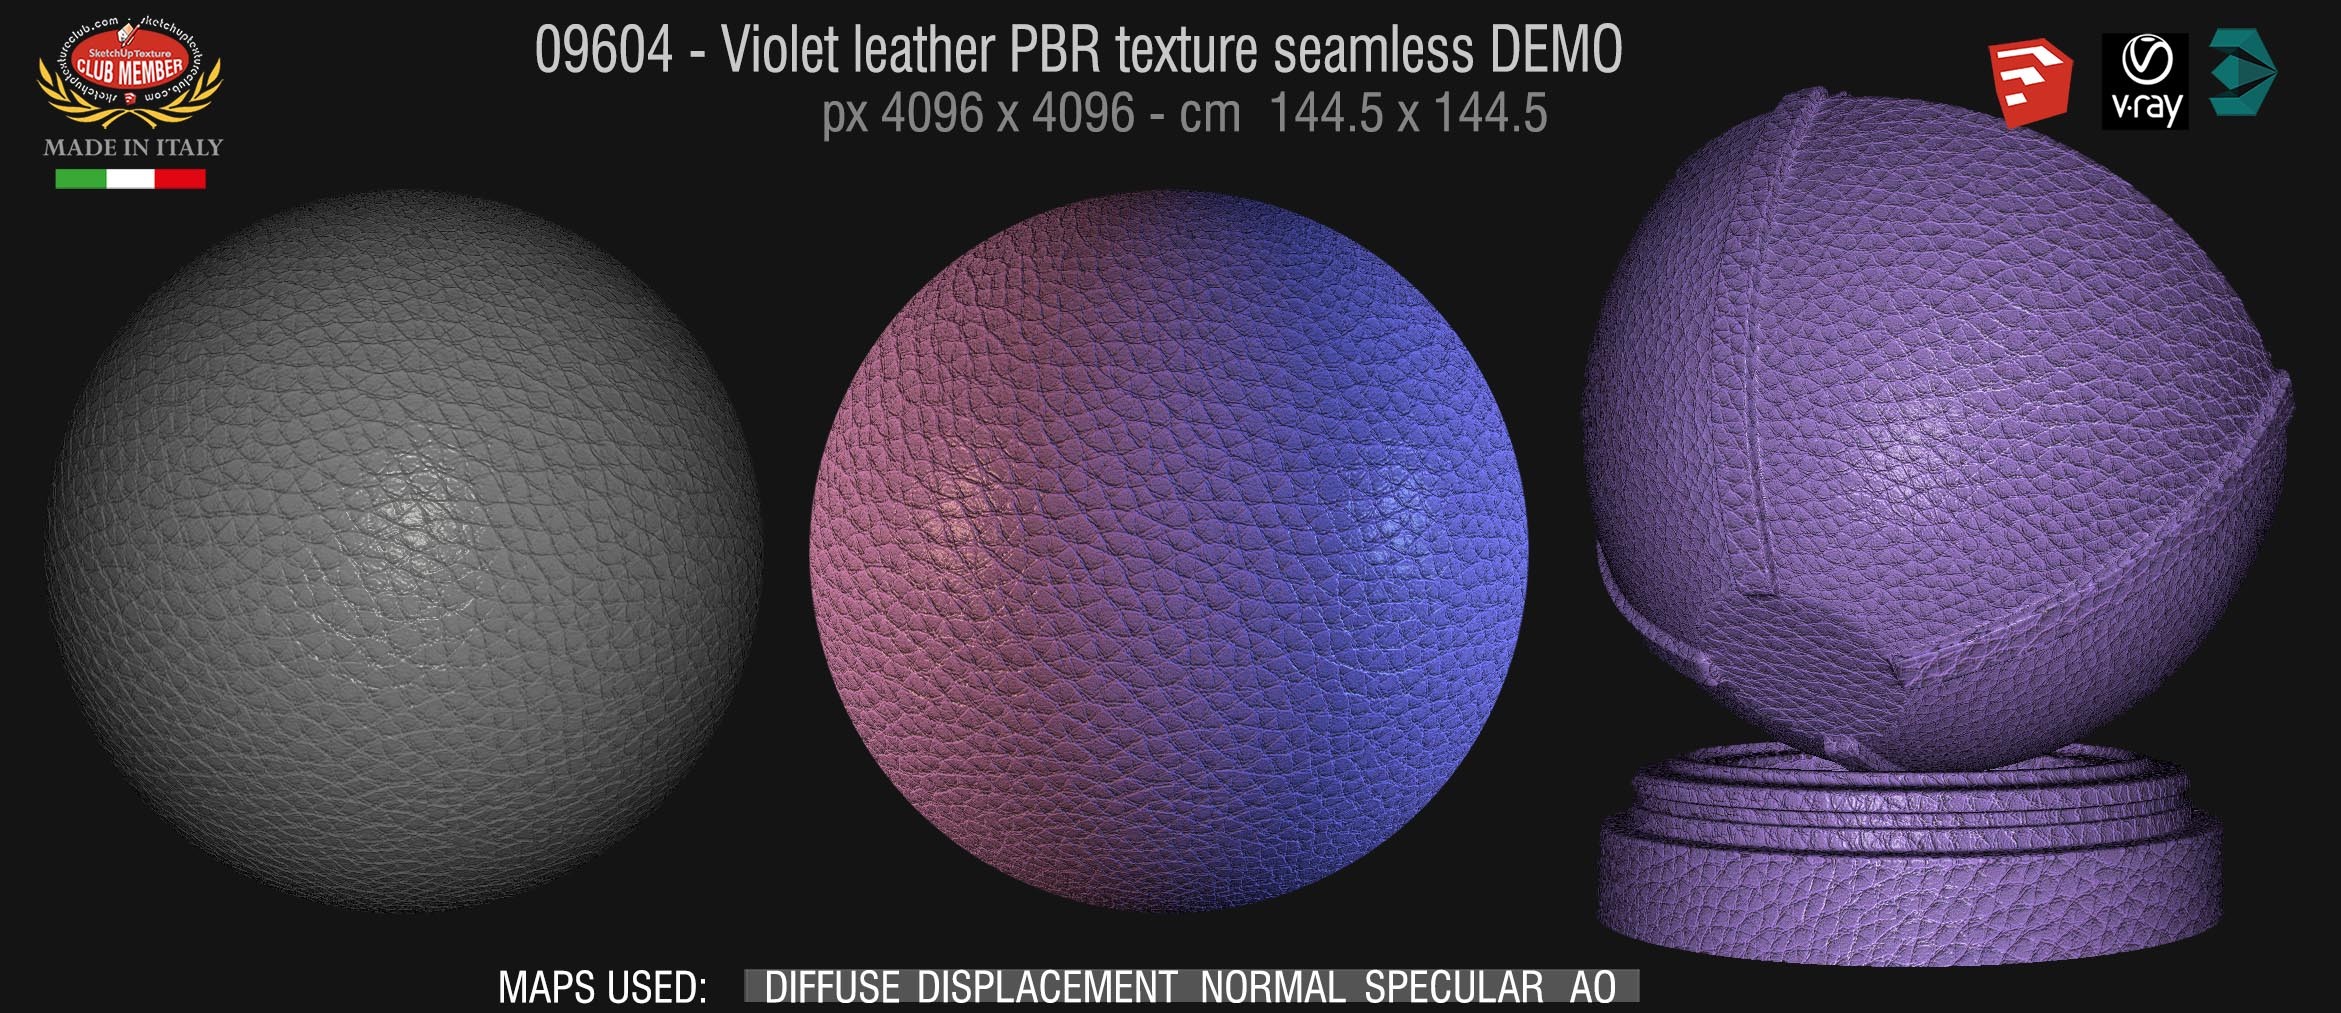 09604 Violet leather PBR texture seamless DEMO